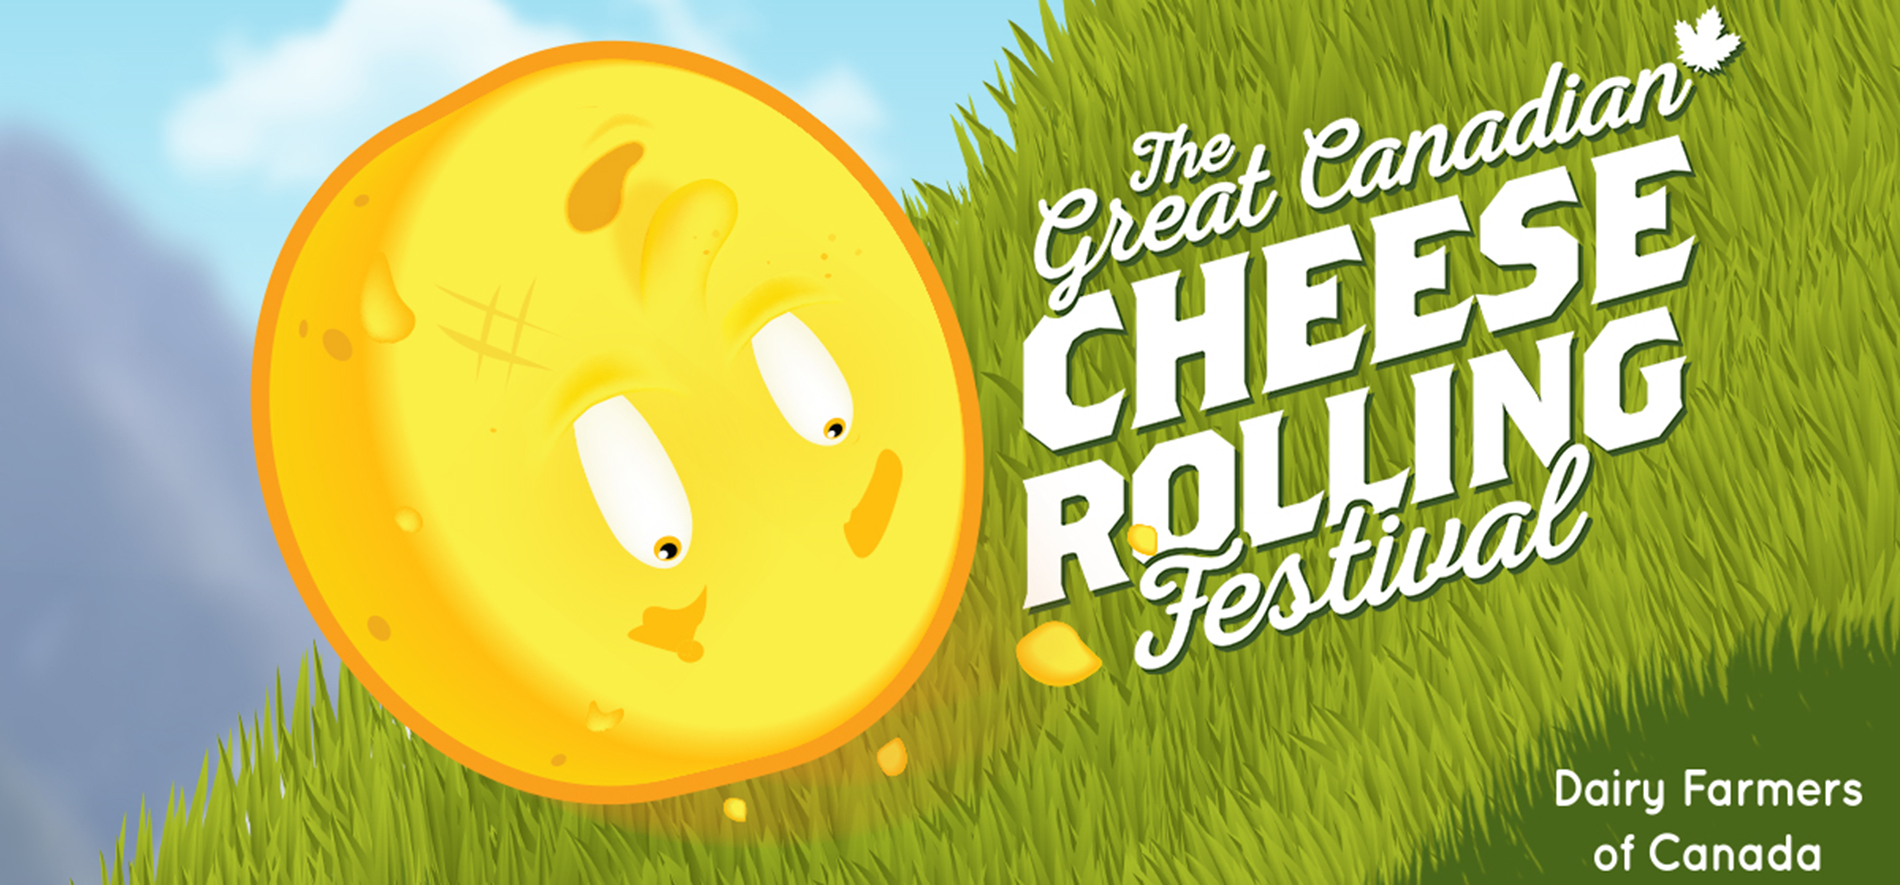 The Great Canadian Cheese Rolling Festival tumbles into its ninth year